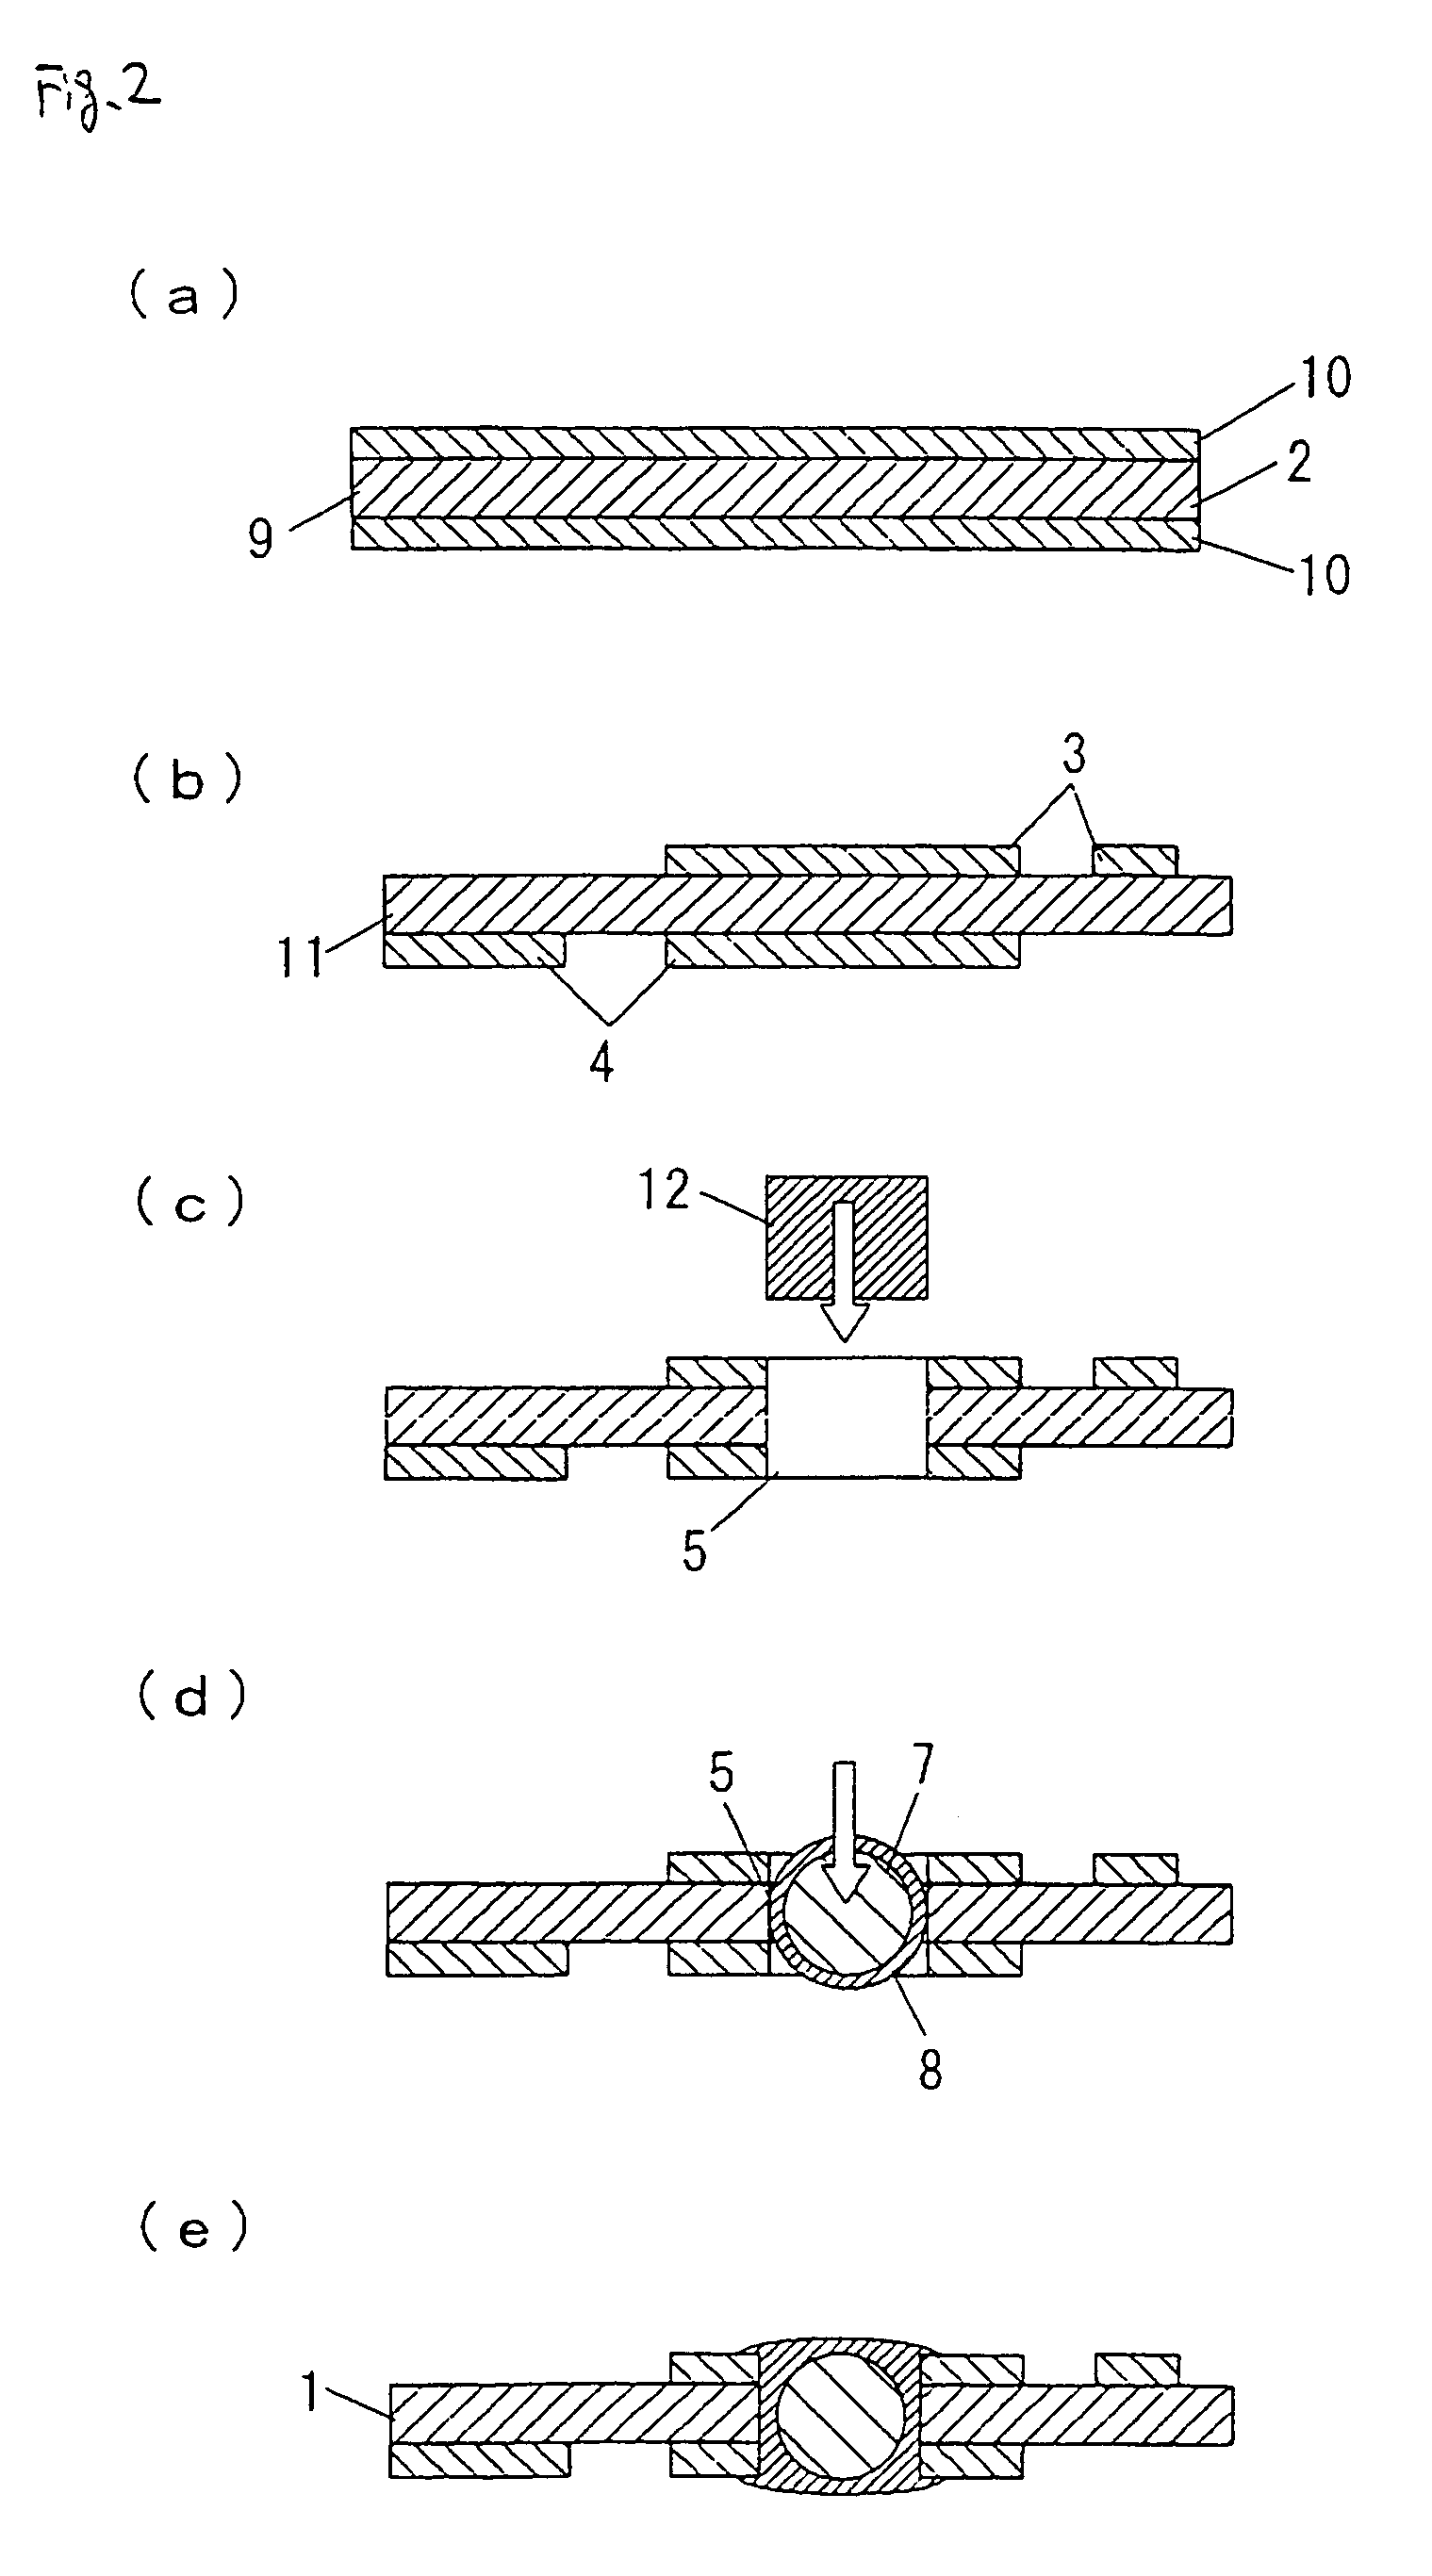 Multi-layer printed circuit board, and method for fabricating the same